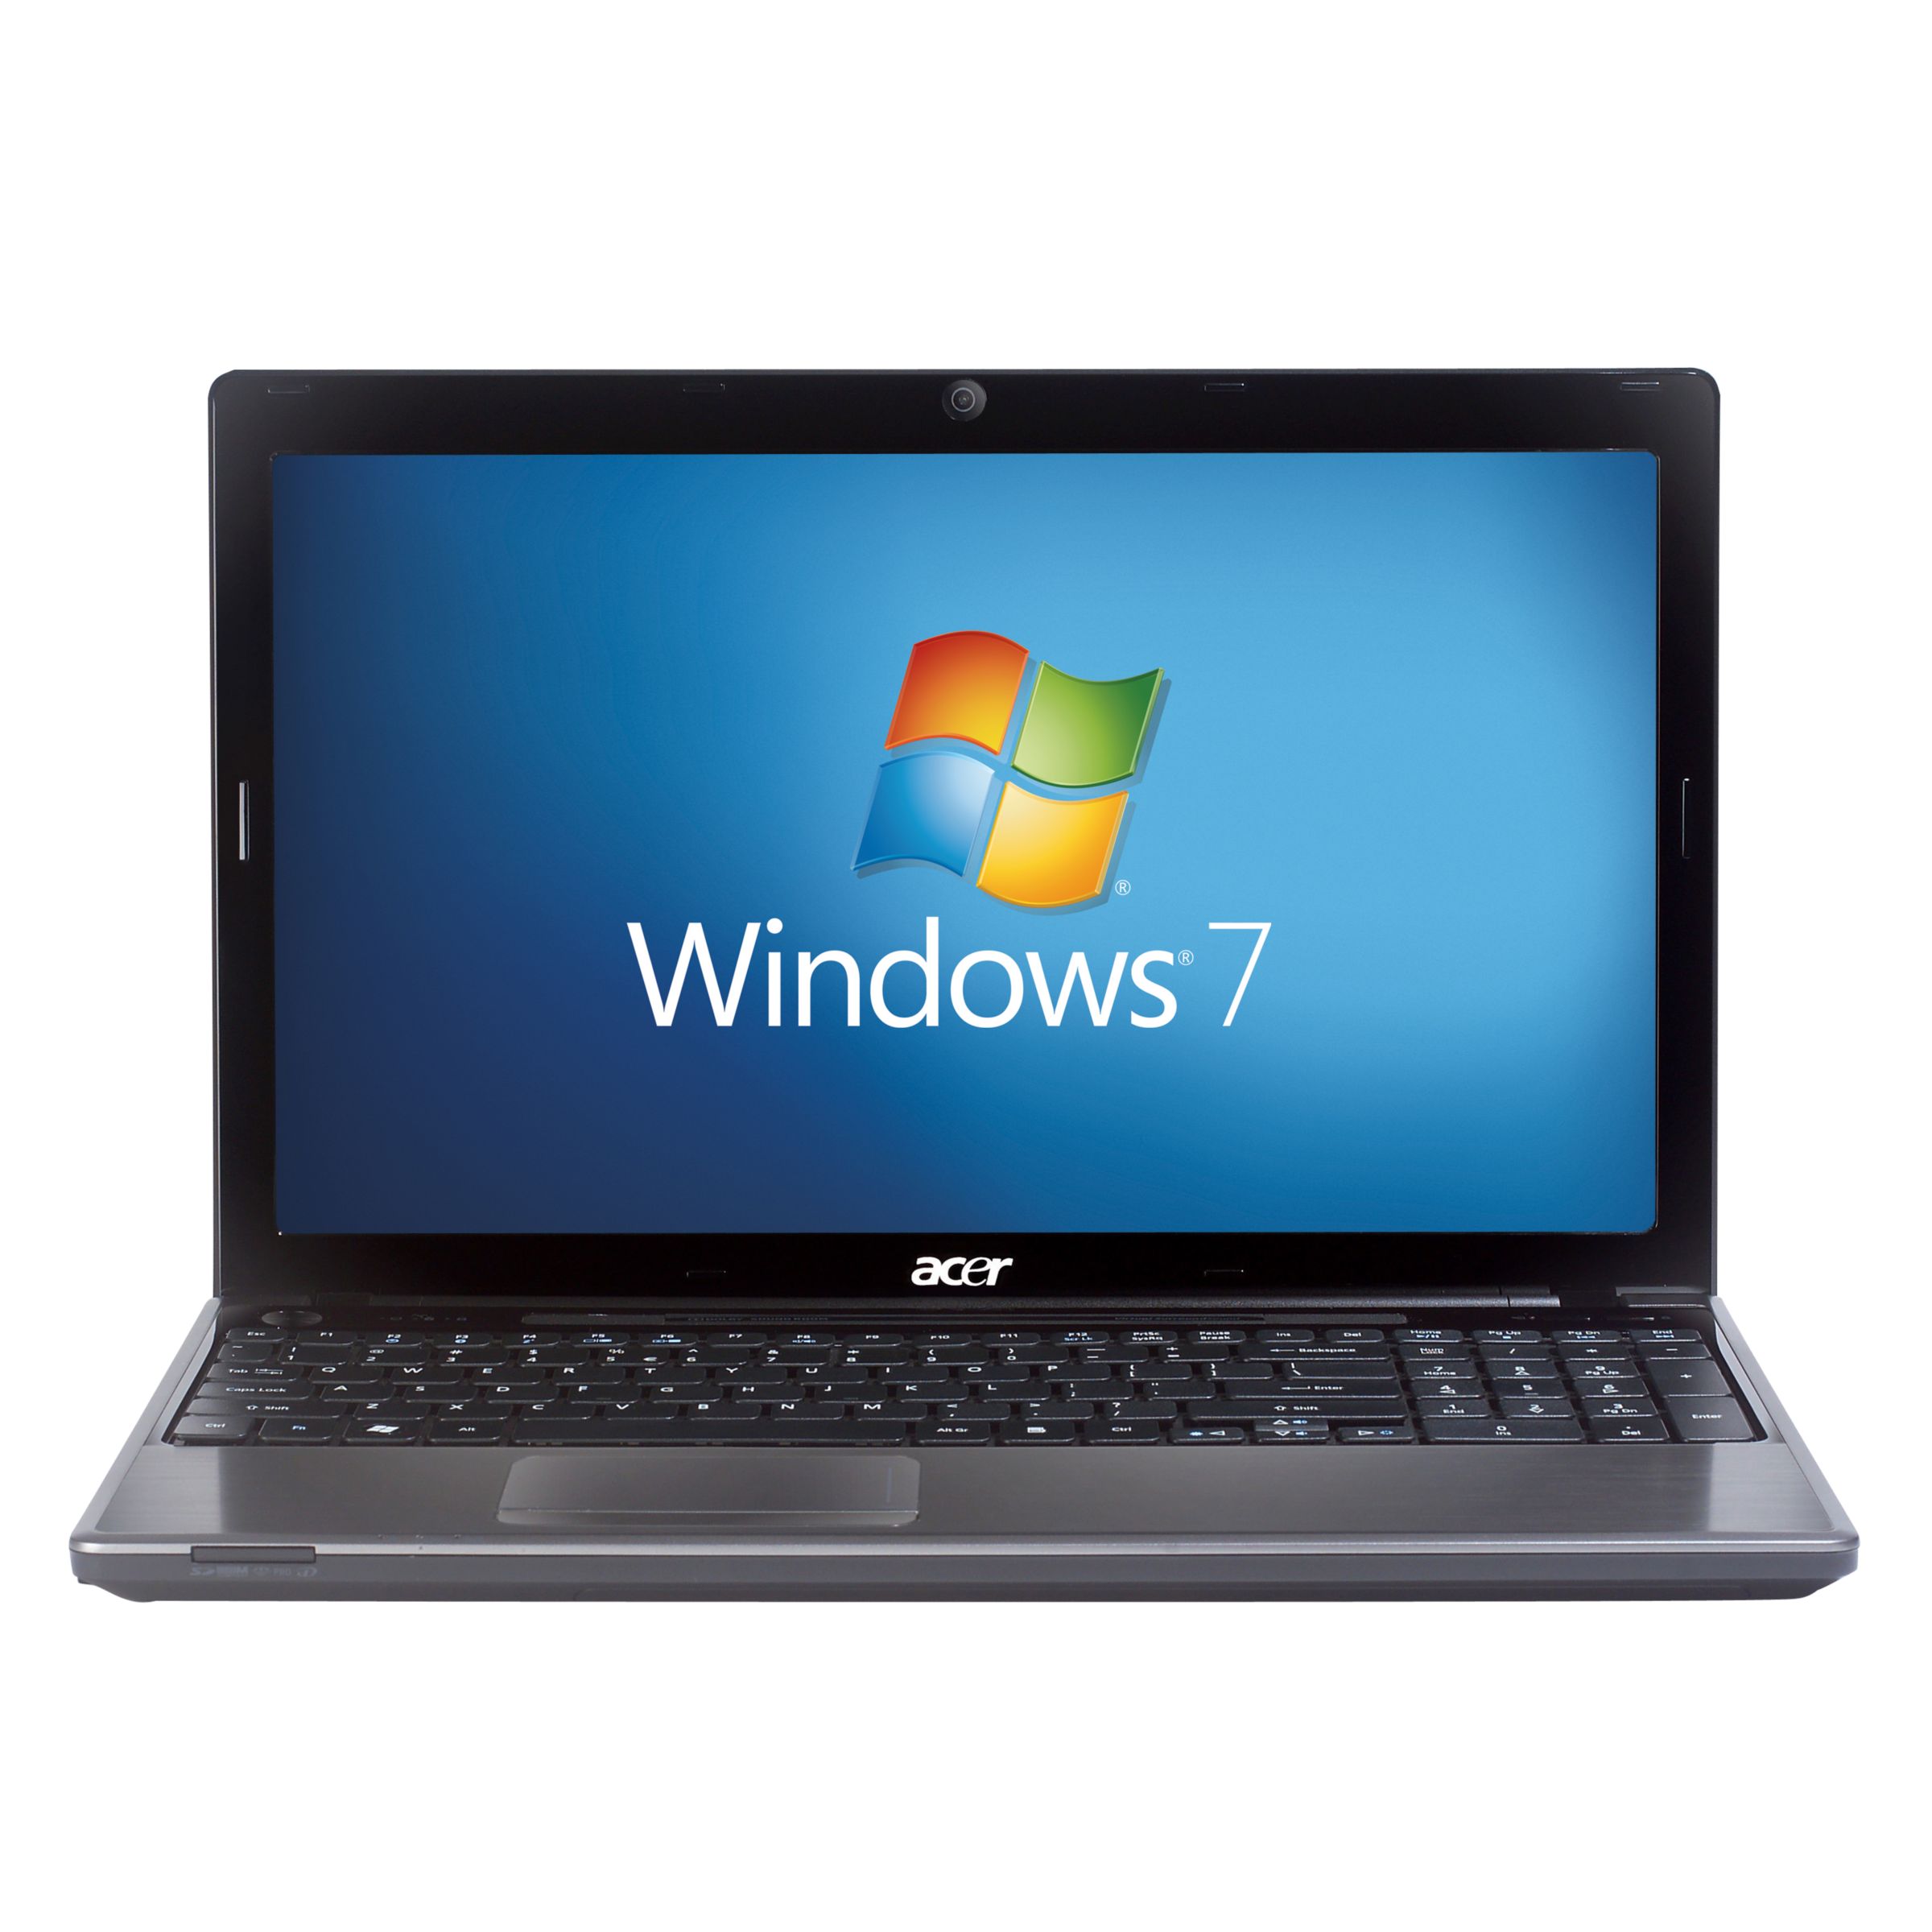 Acer Aspire AS5745G Laptop, Intel Core i5, 640GB, 2.53GHz, 4GB RAM with 15.6 Inch Display at John Lewis